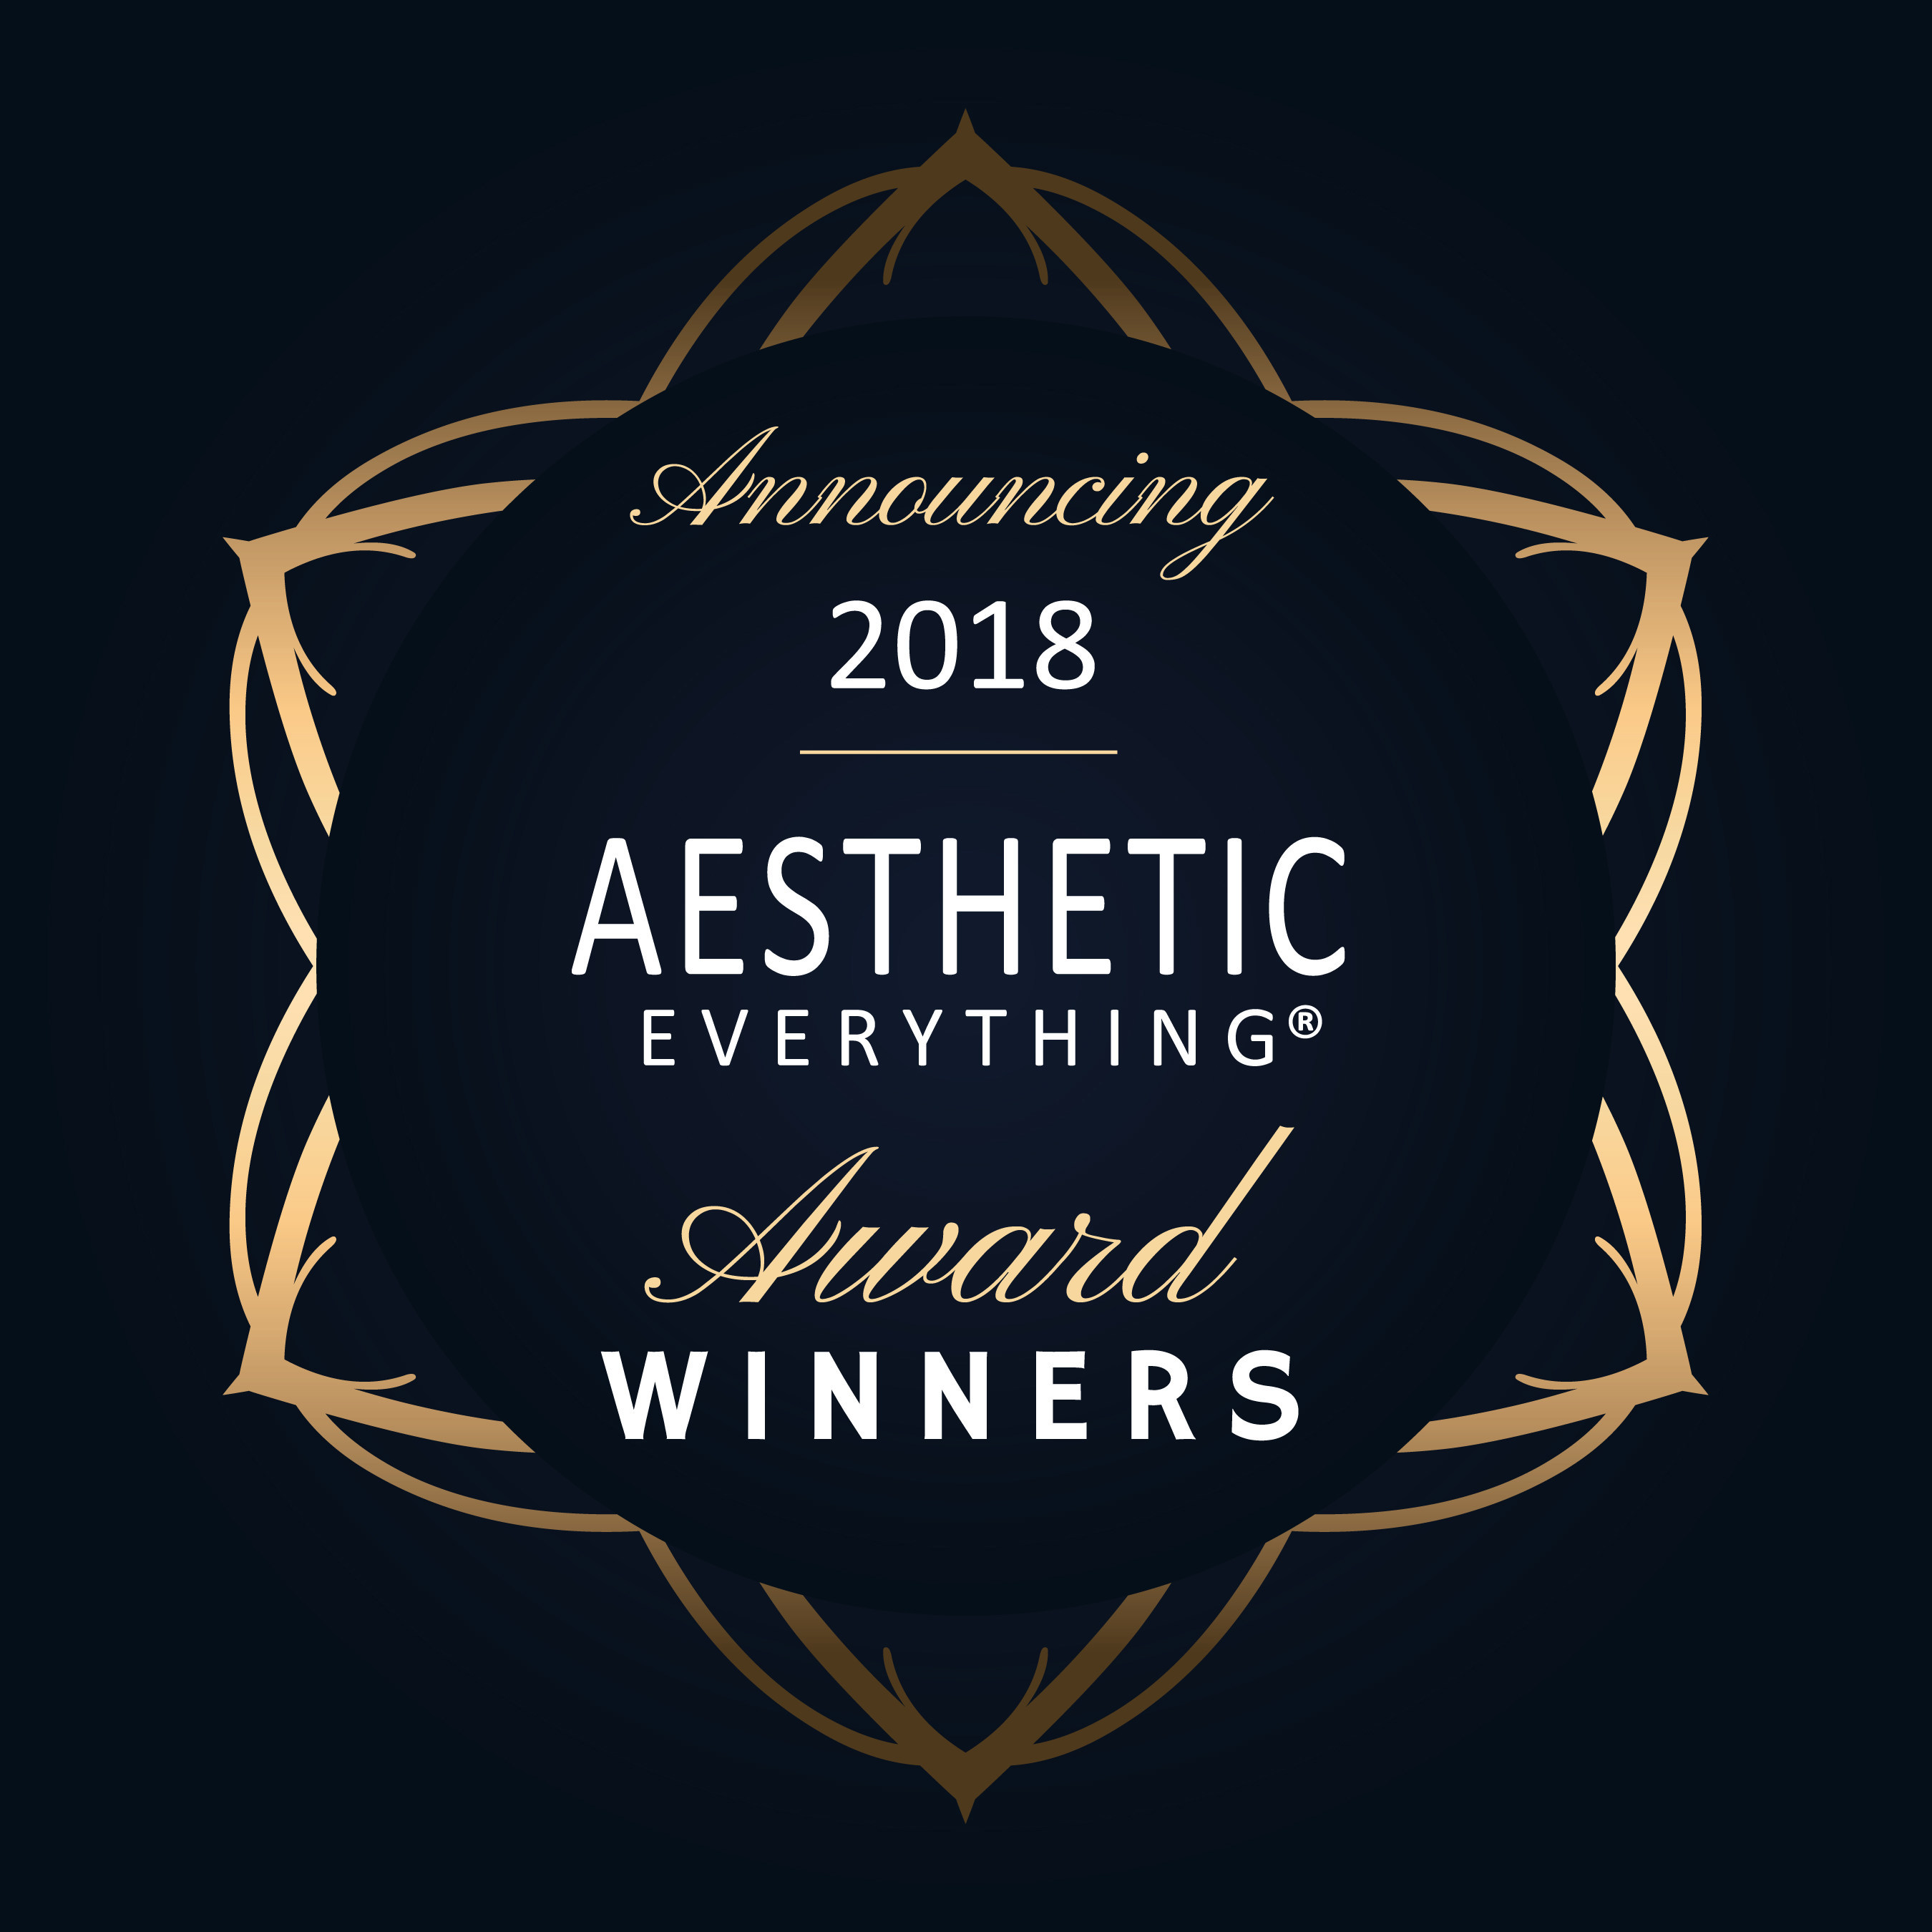 Aesthetic Everything® is excited to announce the winners in their prestigious 2018 Aesthetic Everything® Aesthetic and Cosmetic Medicine Awards.